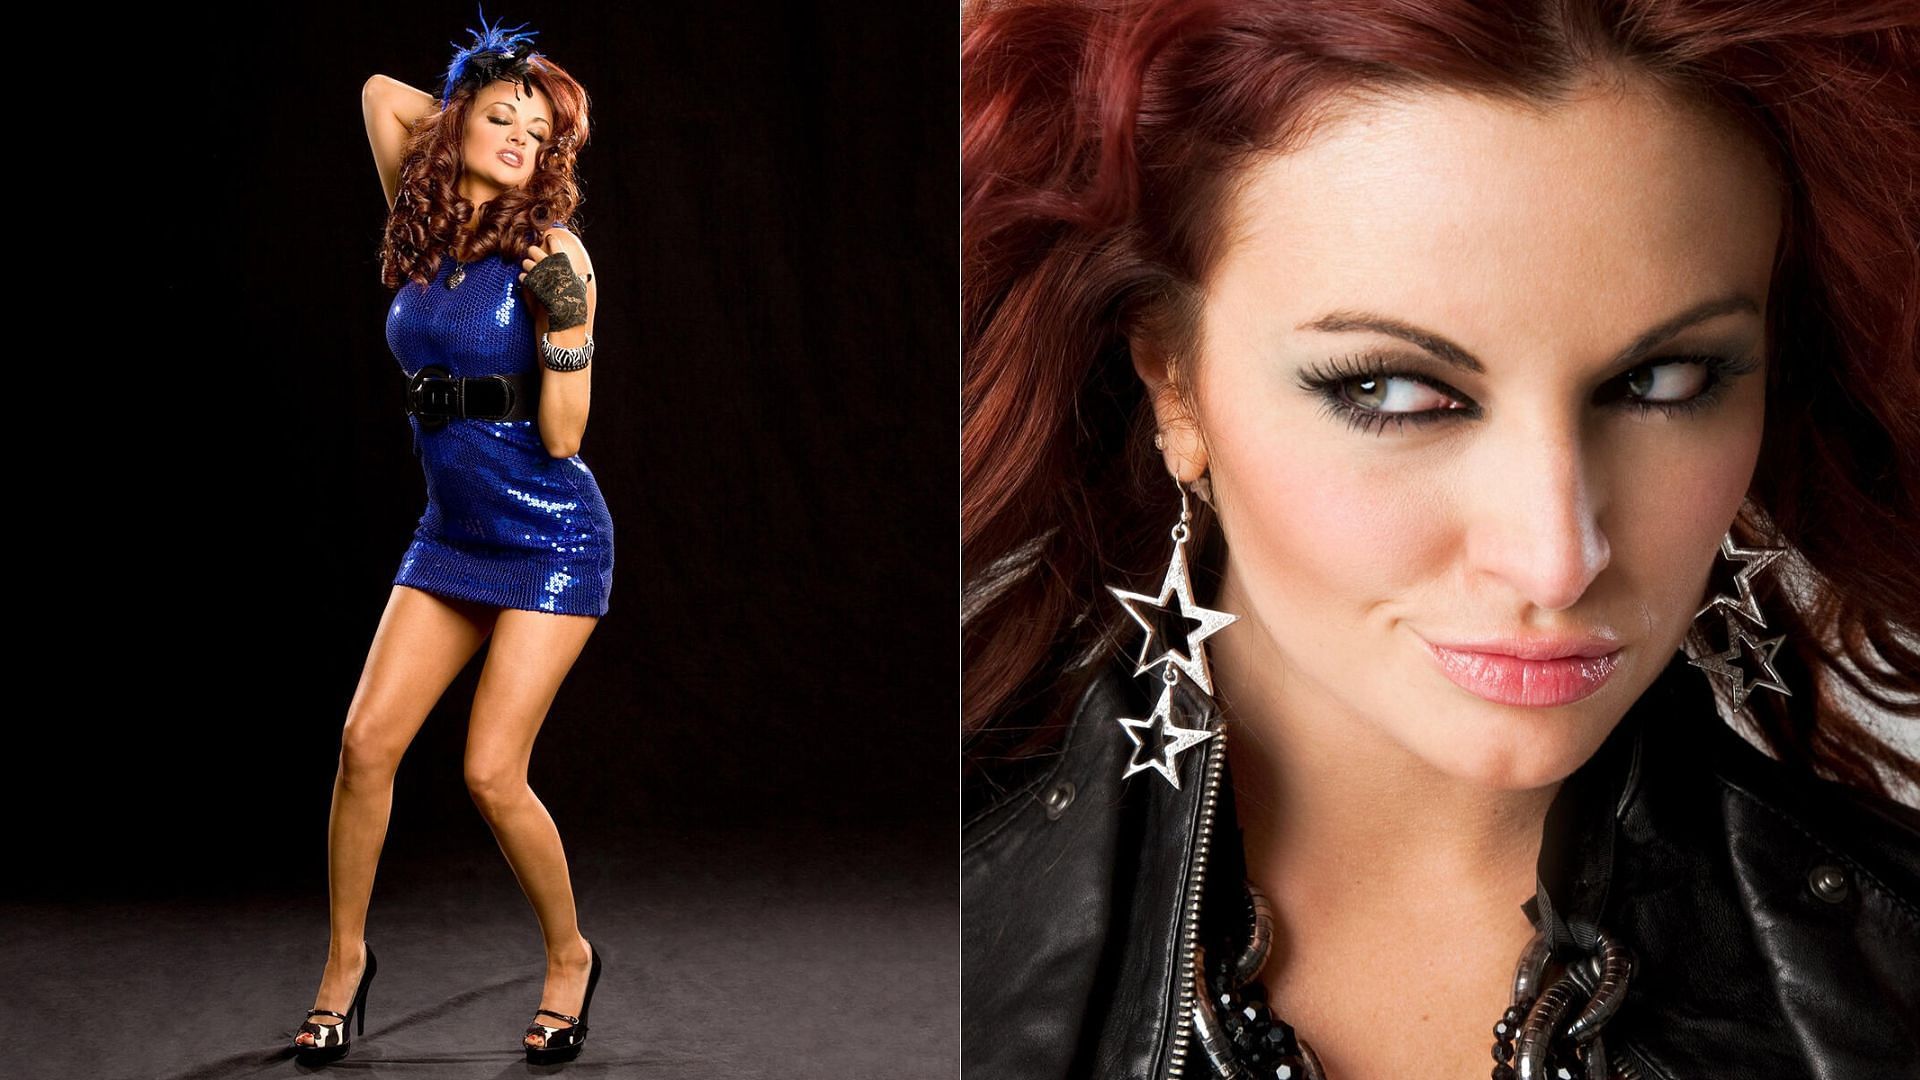 Maria Kanellis has been in the wrestling business since 2004